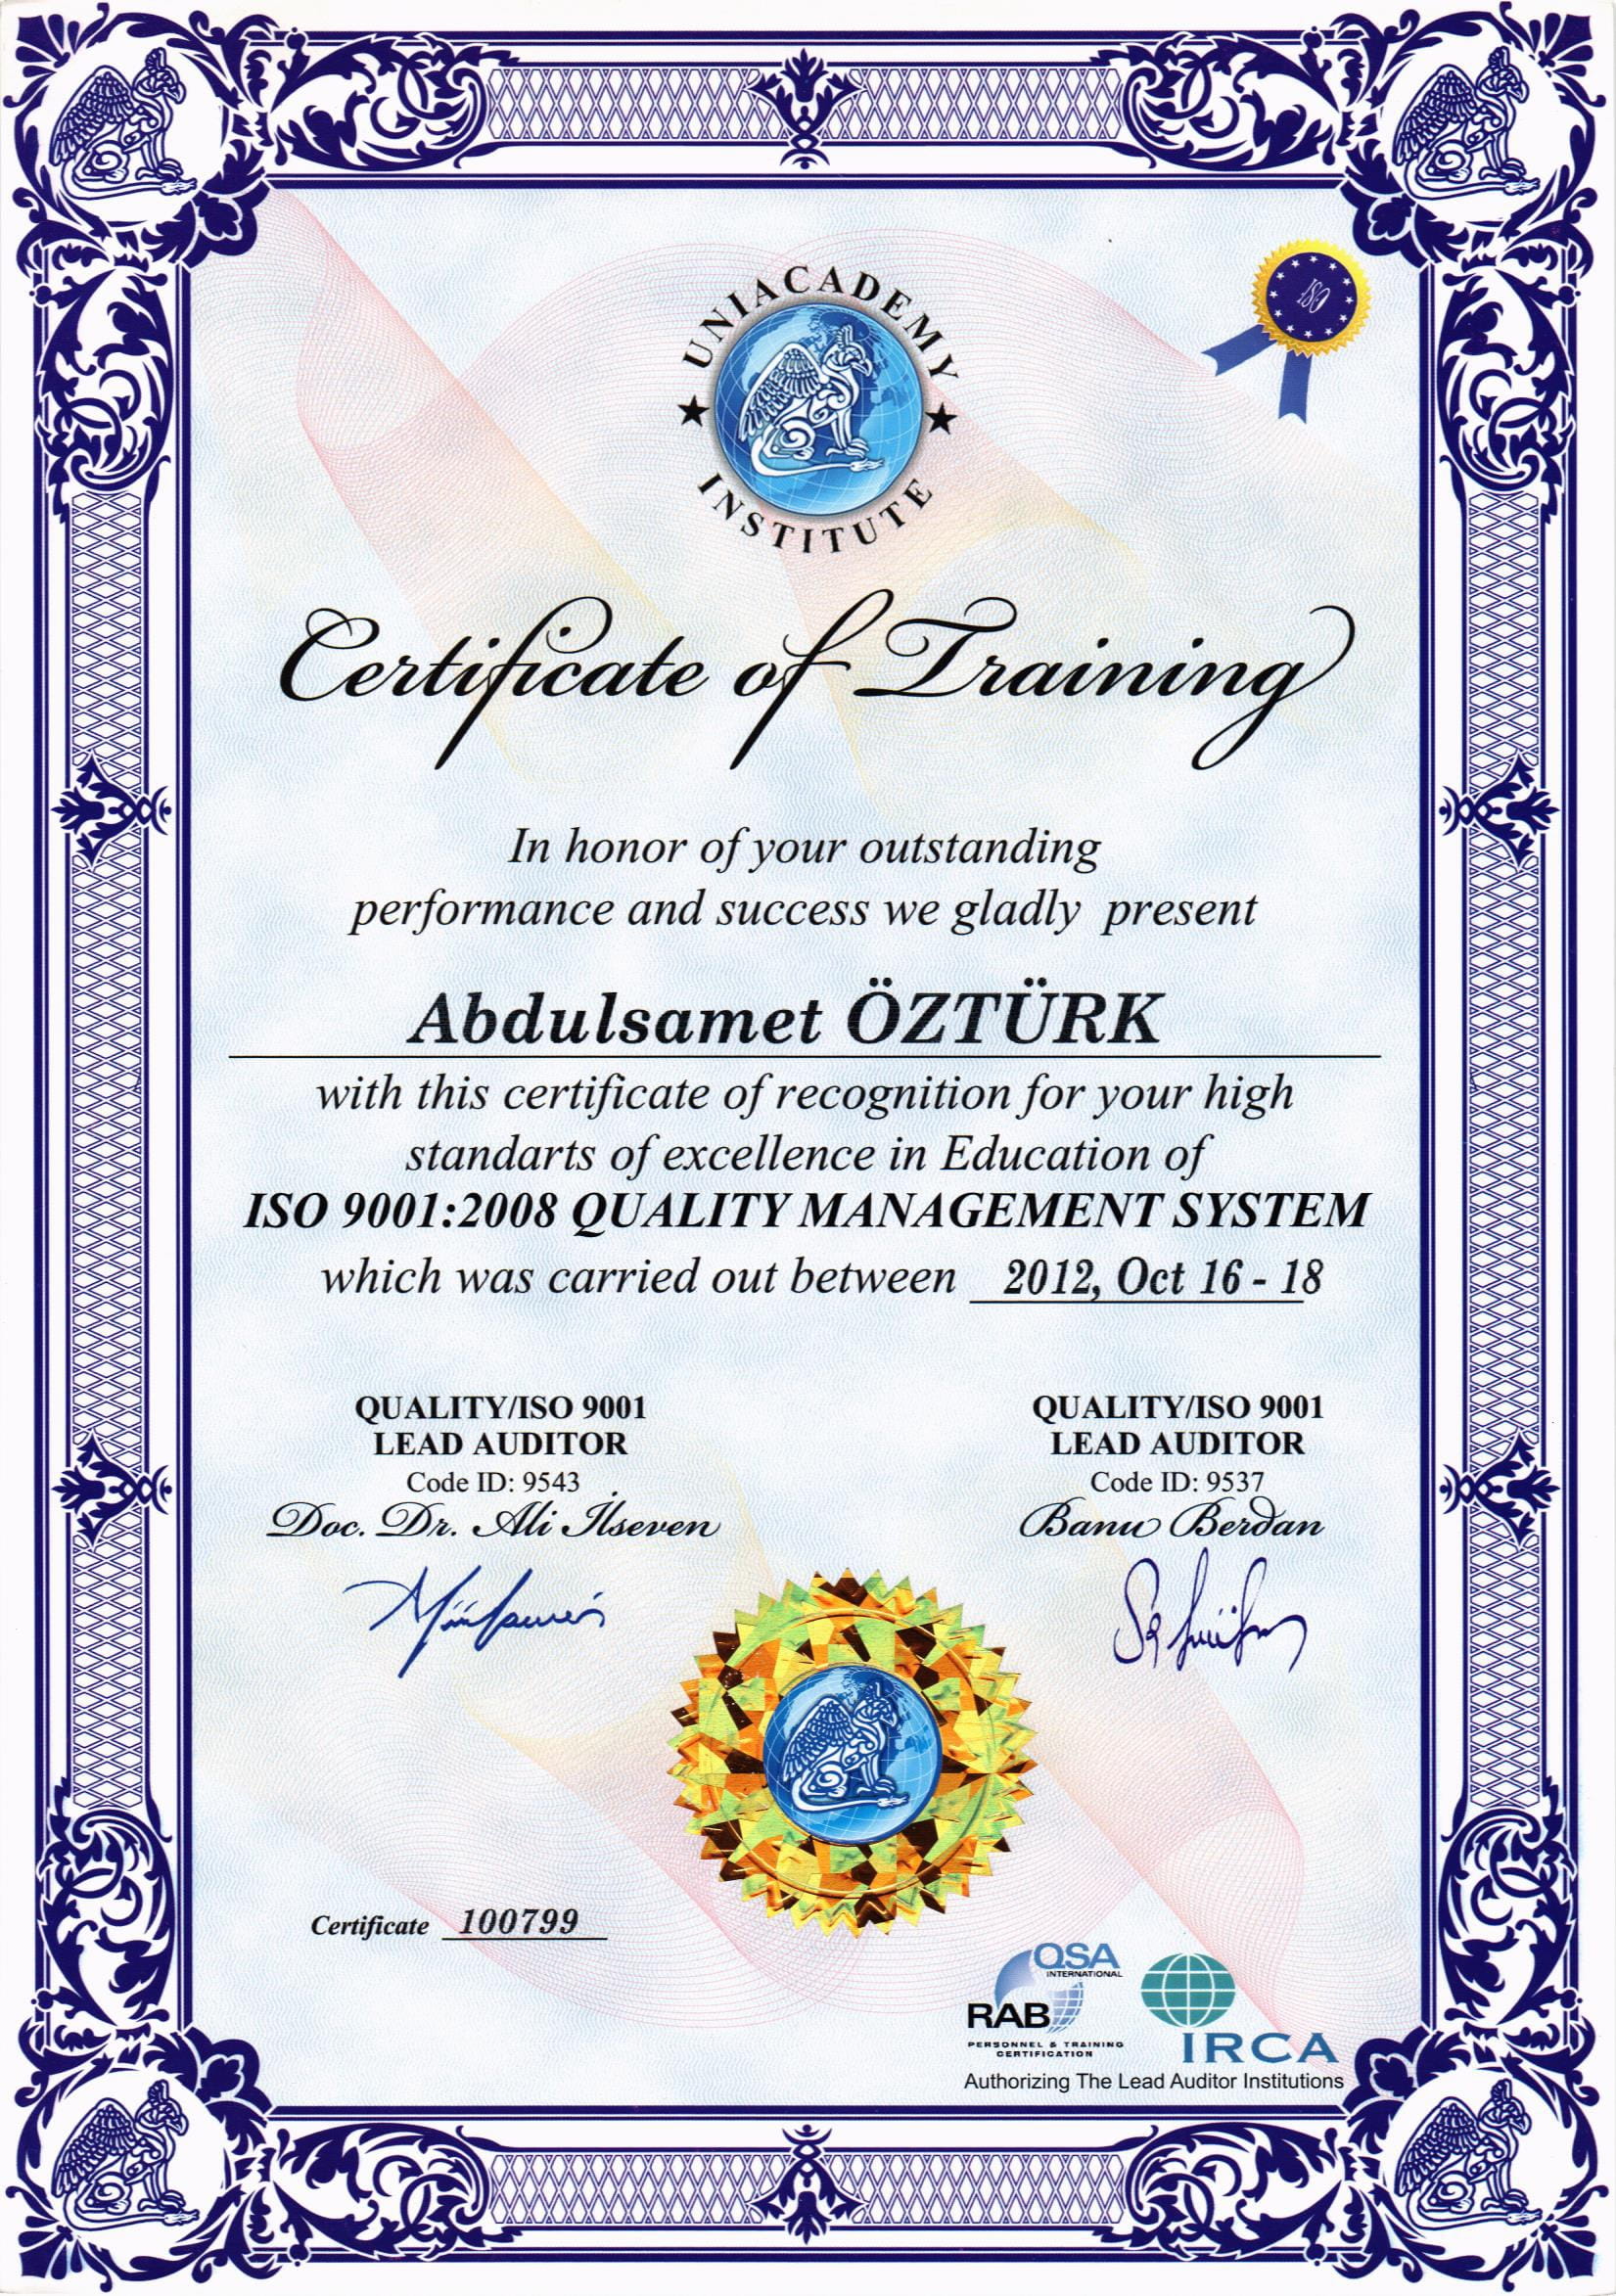 ISO 9001:2008 QUALITY MANAGEMENT SYSTEM